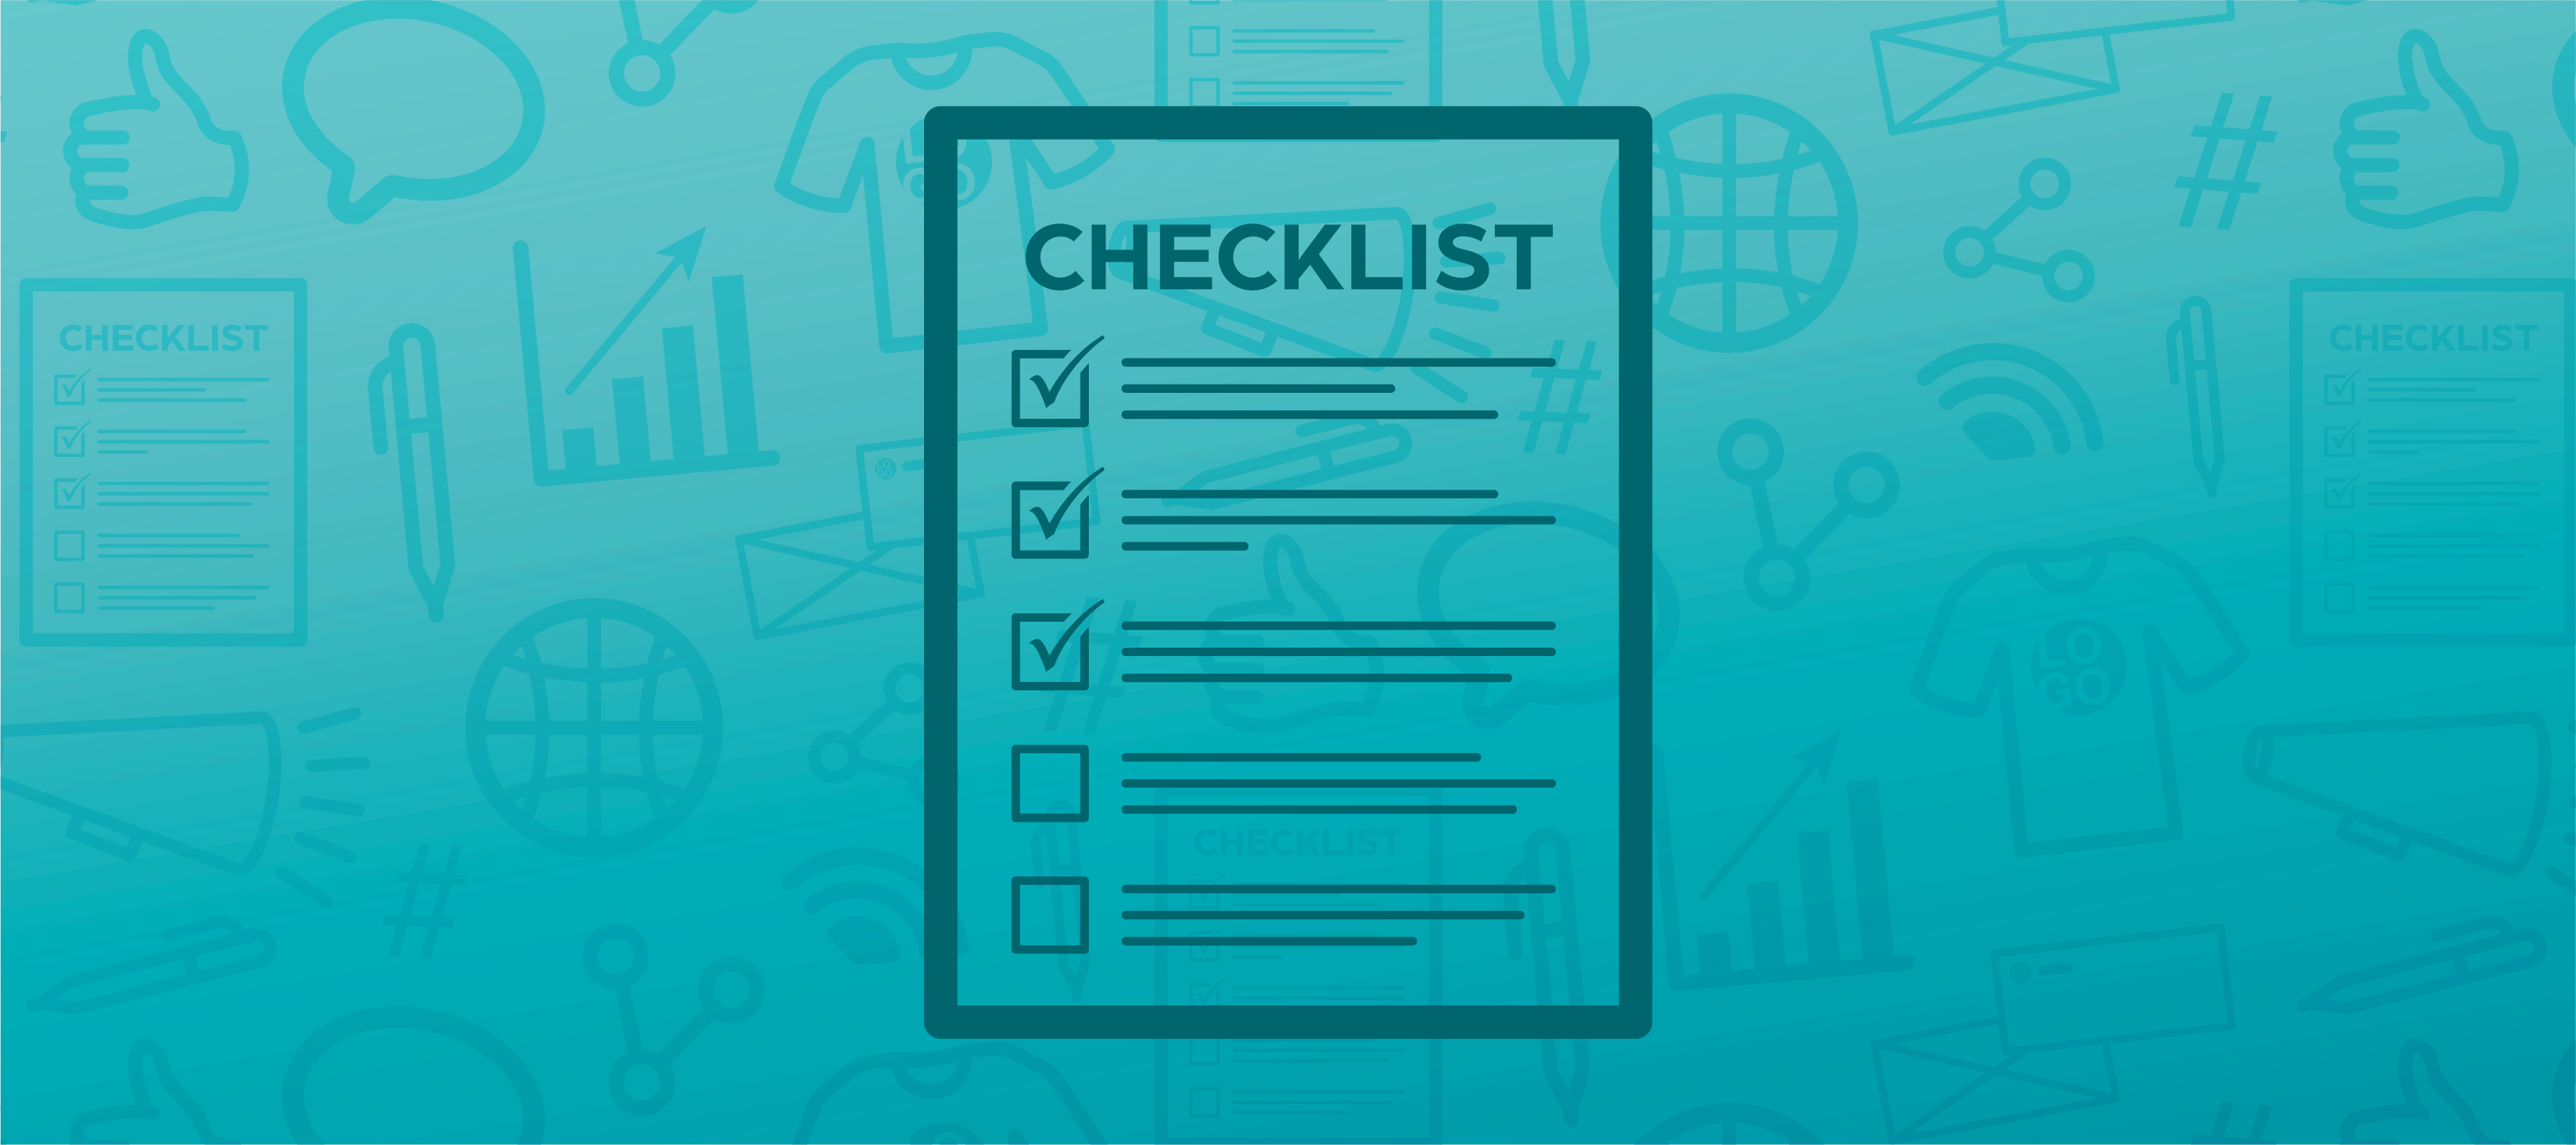 A blue header image featuring an icon of a checklist in the center and faded marketing icons in the background